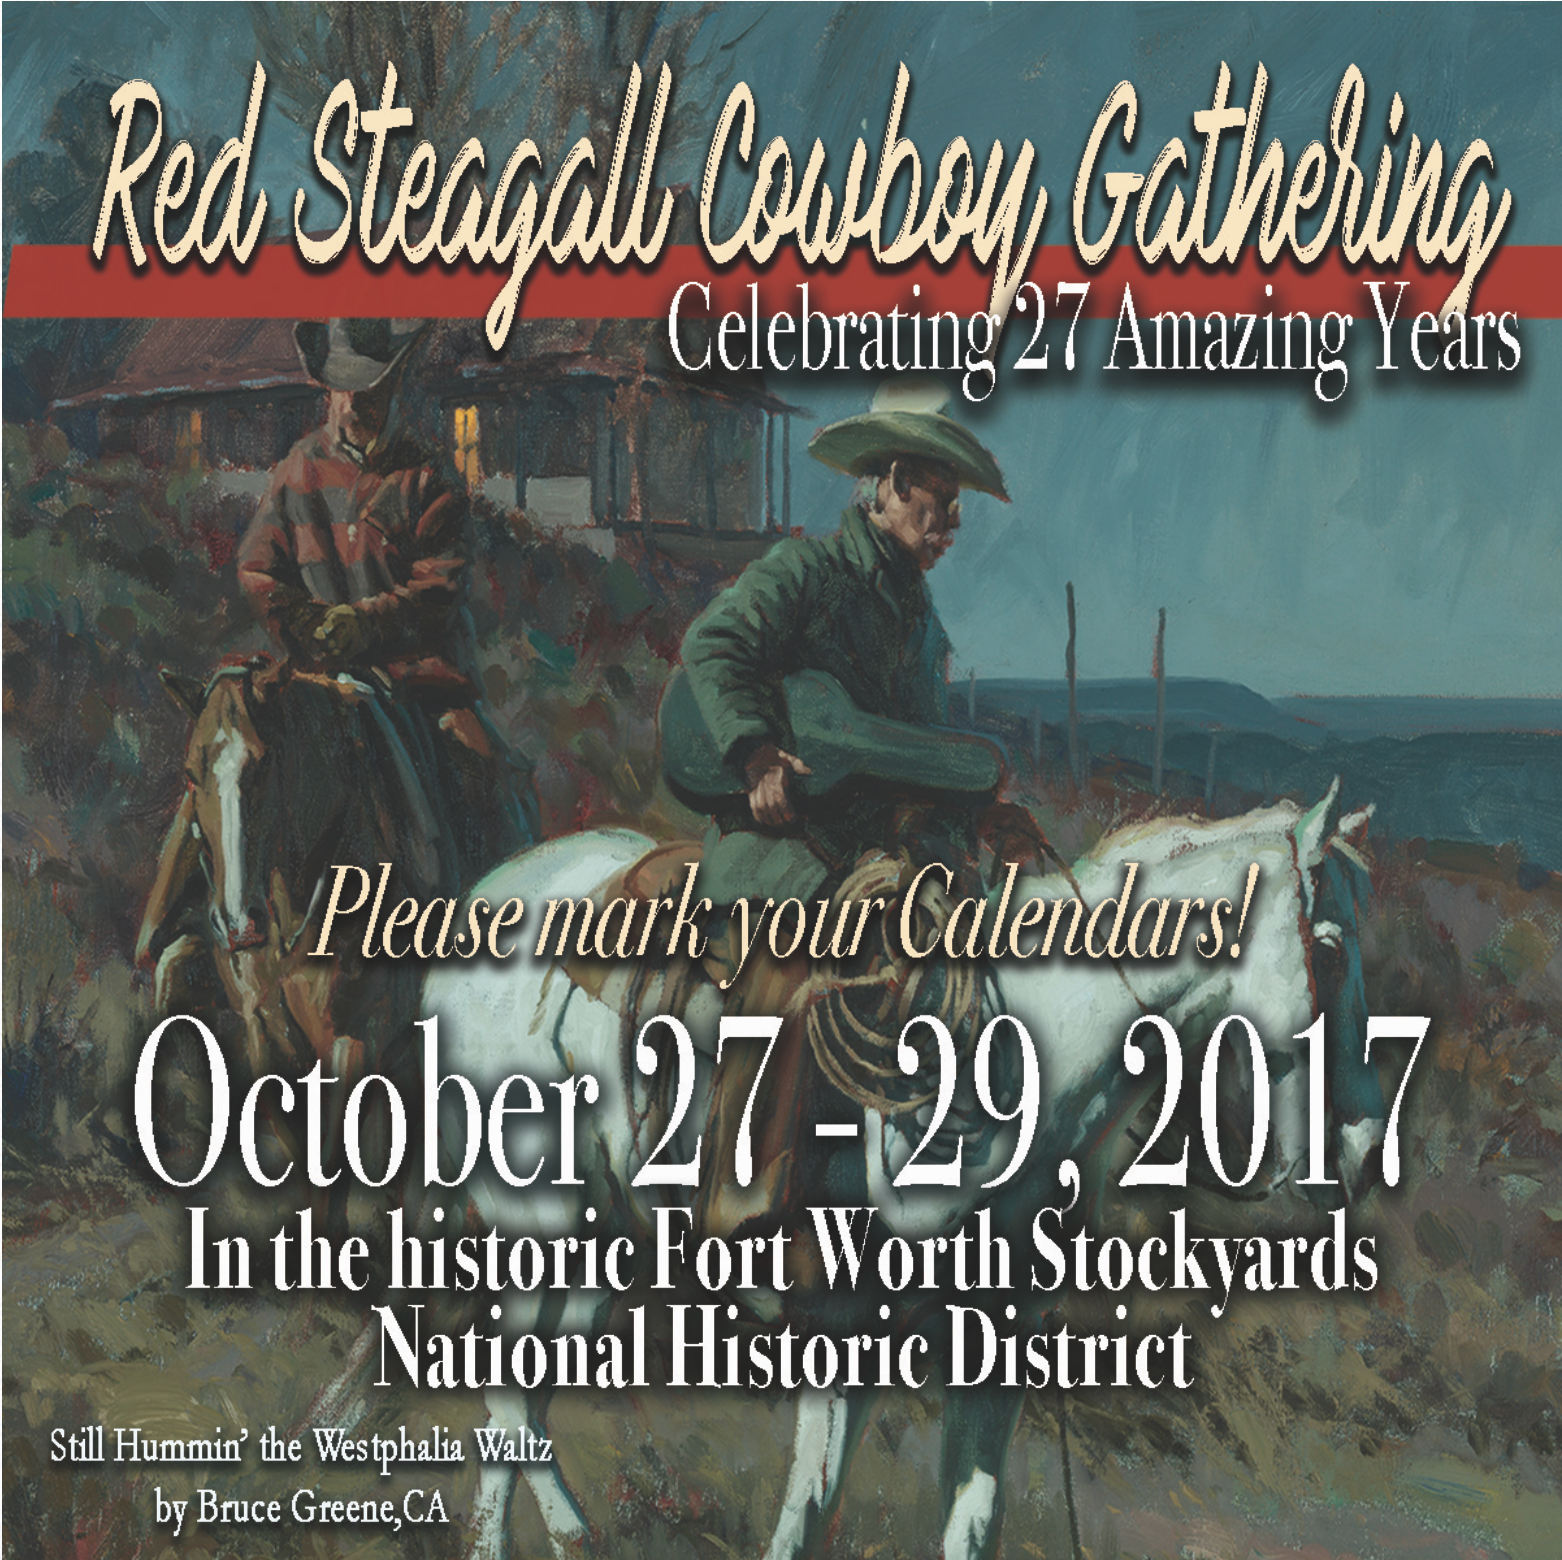 Red Steagall Cowboy Gathering